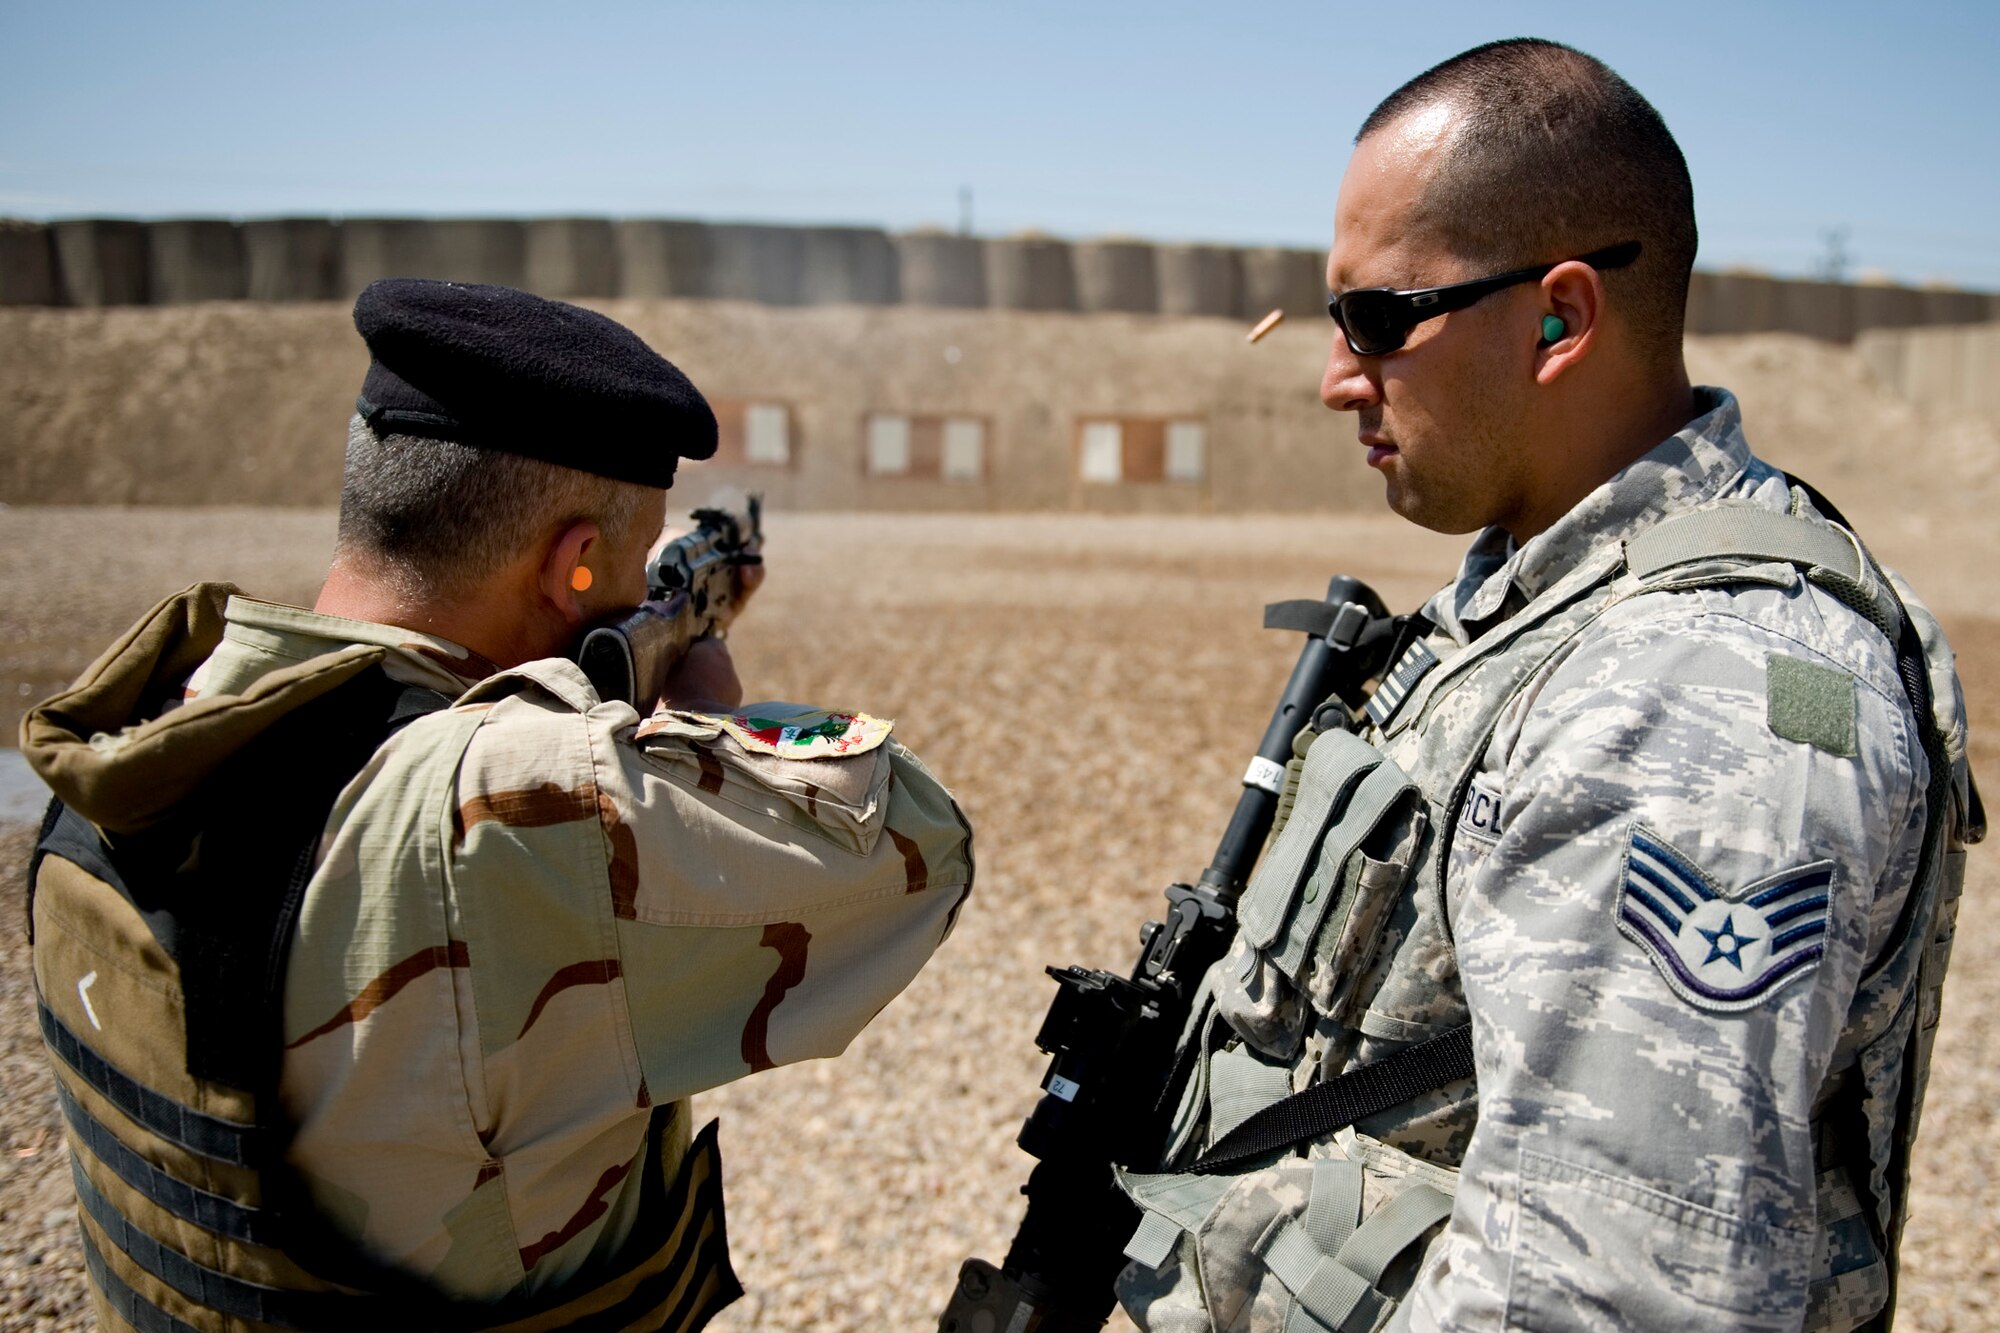 Staff Sgt. George Rincon observes an Iraqi airman during a firing drill March 29, 2011. Members of the 447th Eexpeditionary Security Forces Sqaudron trained Iraqi security forces airmen ensuring weapons qualification and teaching defensive tactics, vehicle searches and other force protection measures. Sergeant Rincon is assigned to the 447th ESFS. (U.S. Air Force photo/Staff Sgt. Levi Riendeau)